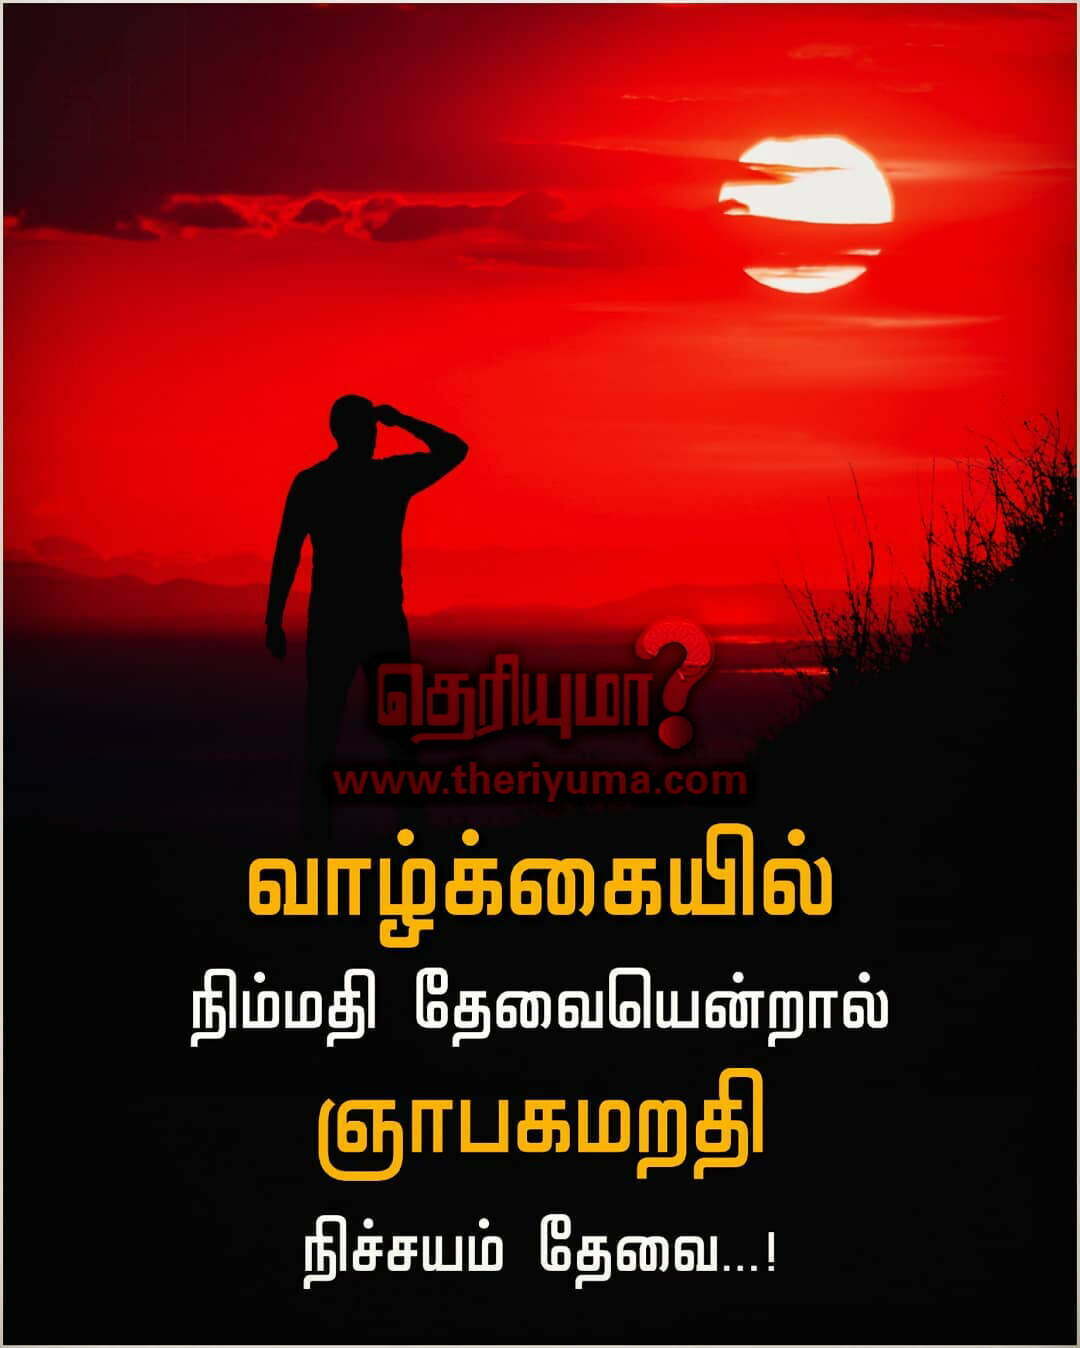 Inspirational quotes in tamil, Tamil motivational Images Theriyuma.com